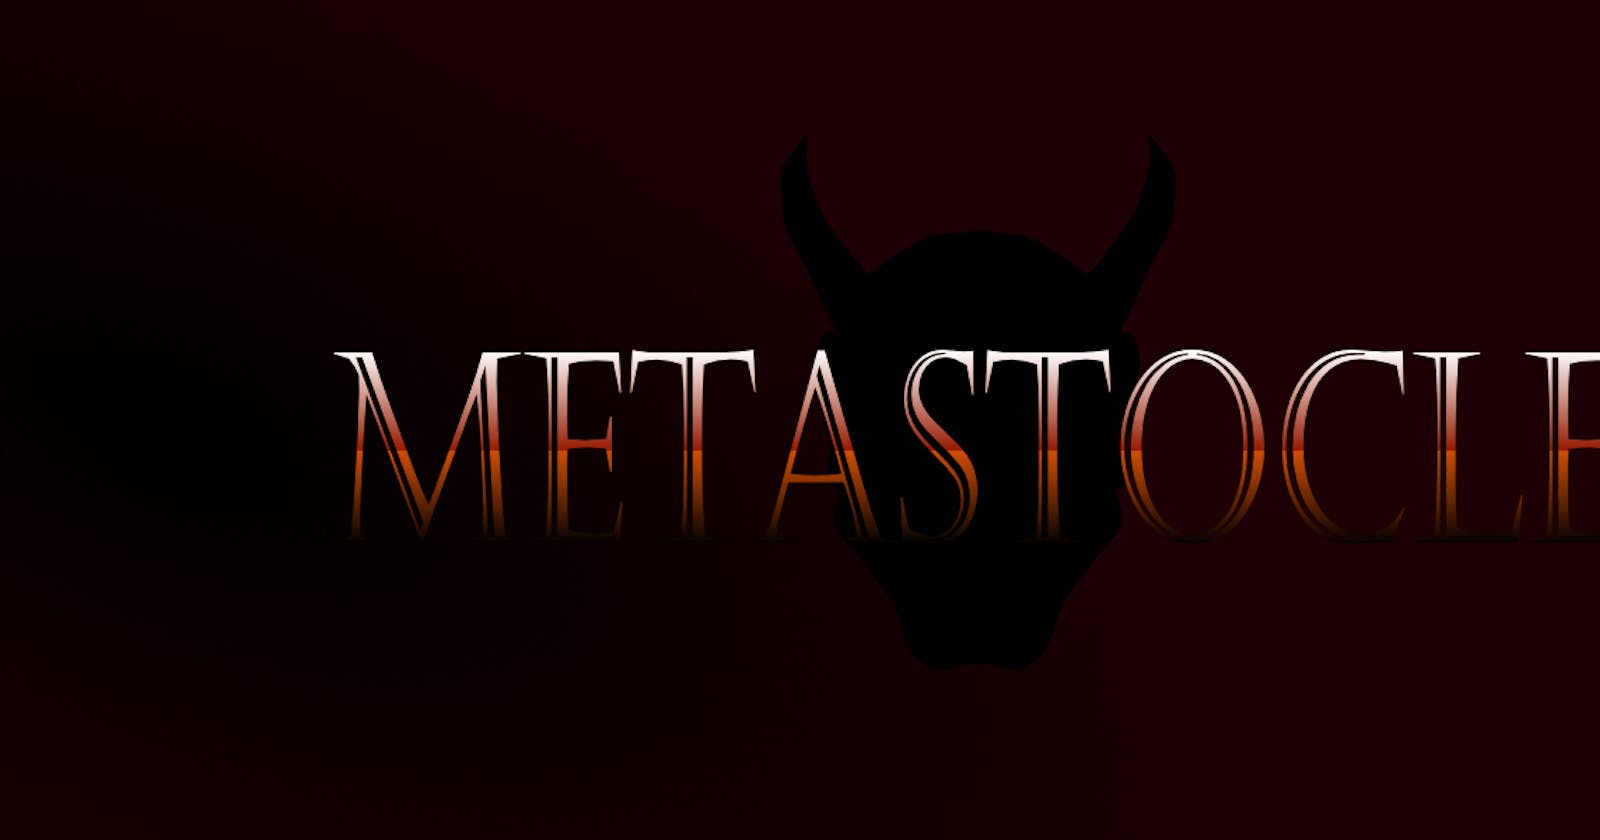 Metastocle - a decentralized data storage